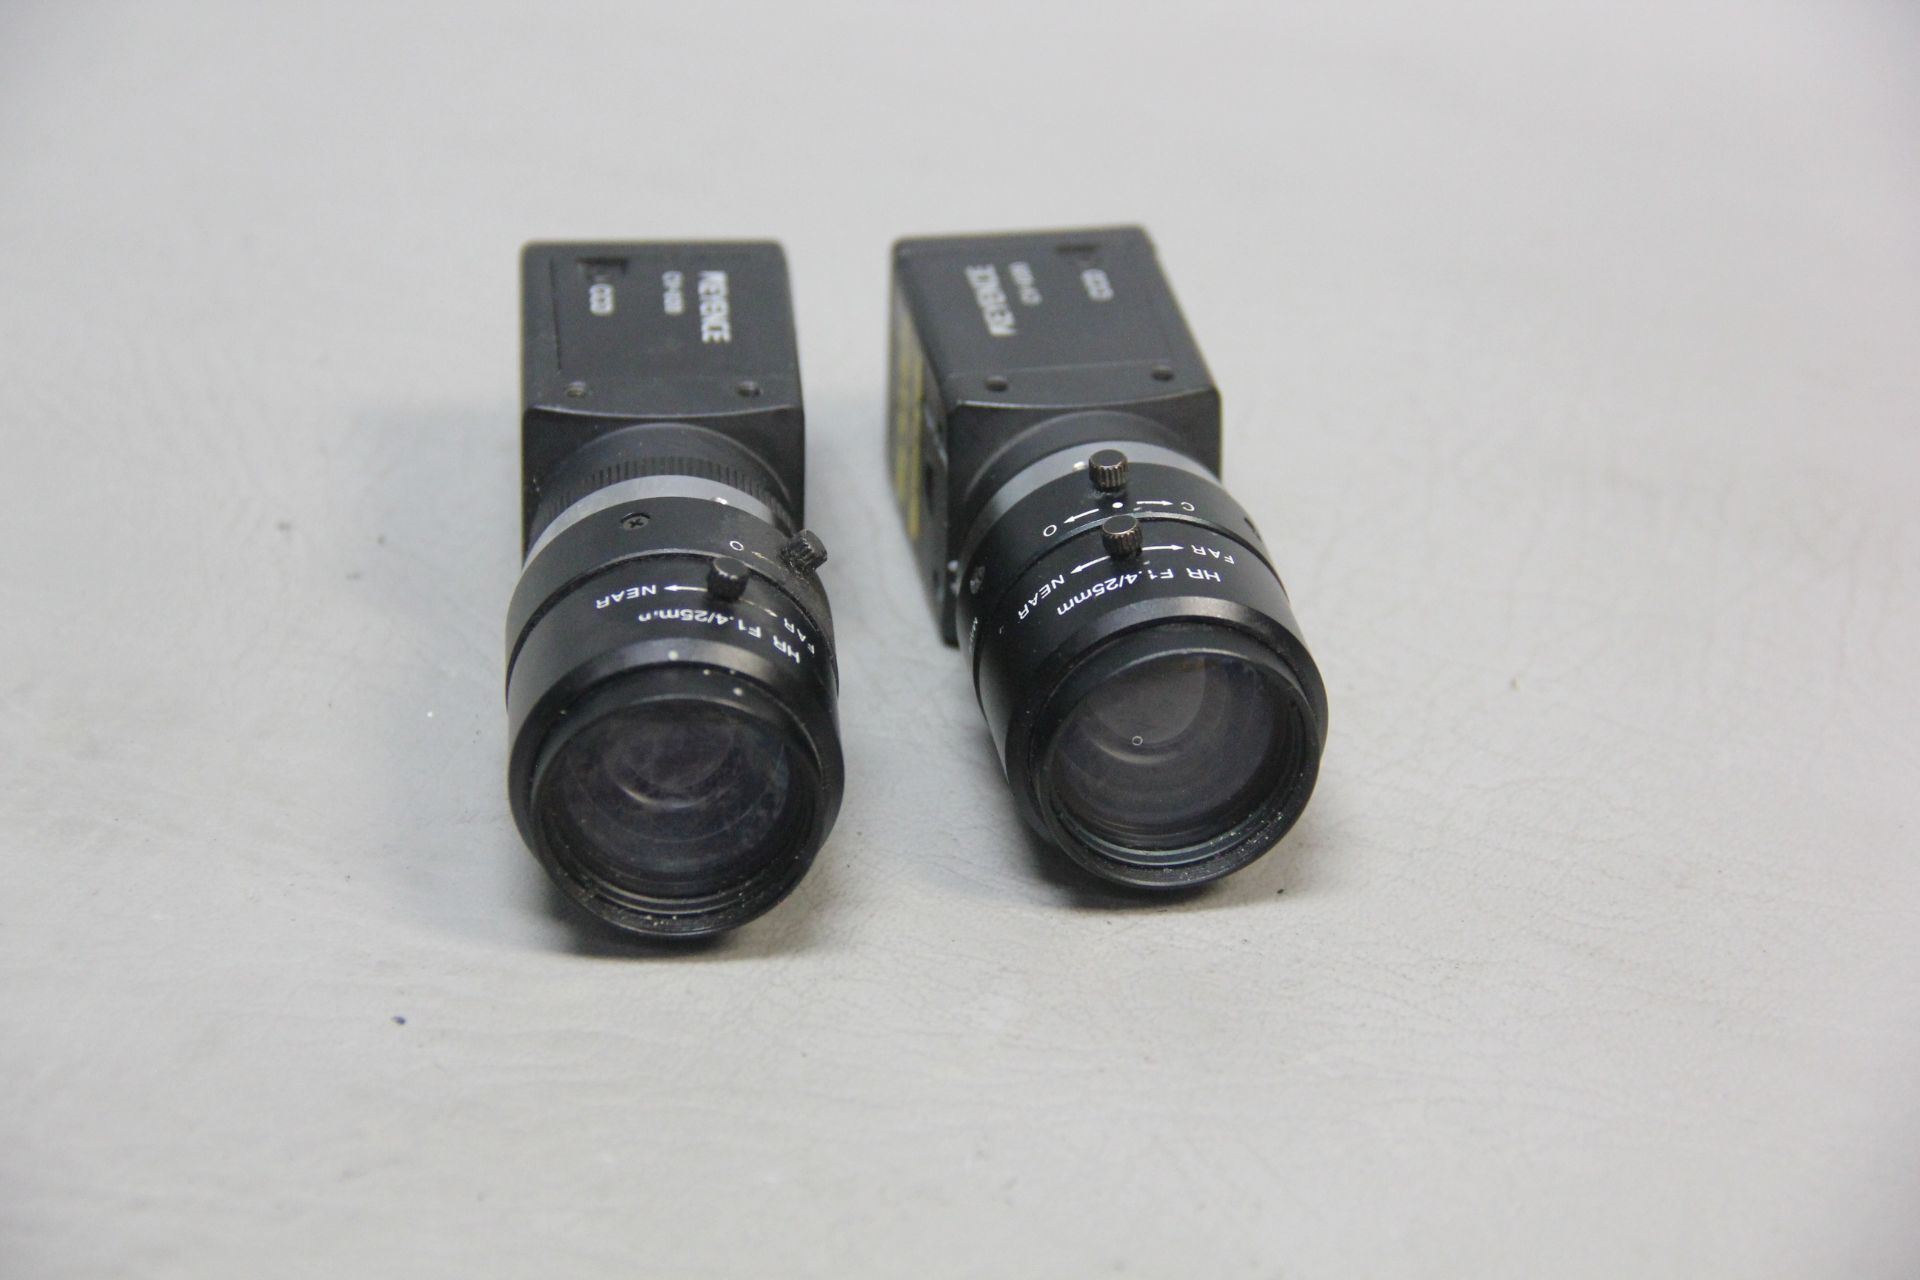 2 KEYENCE MACHINE VISION CAMERAS WITH LENSES - Image 2 of 3